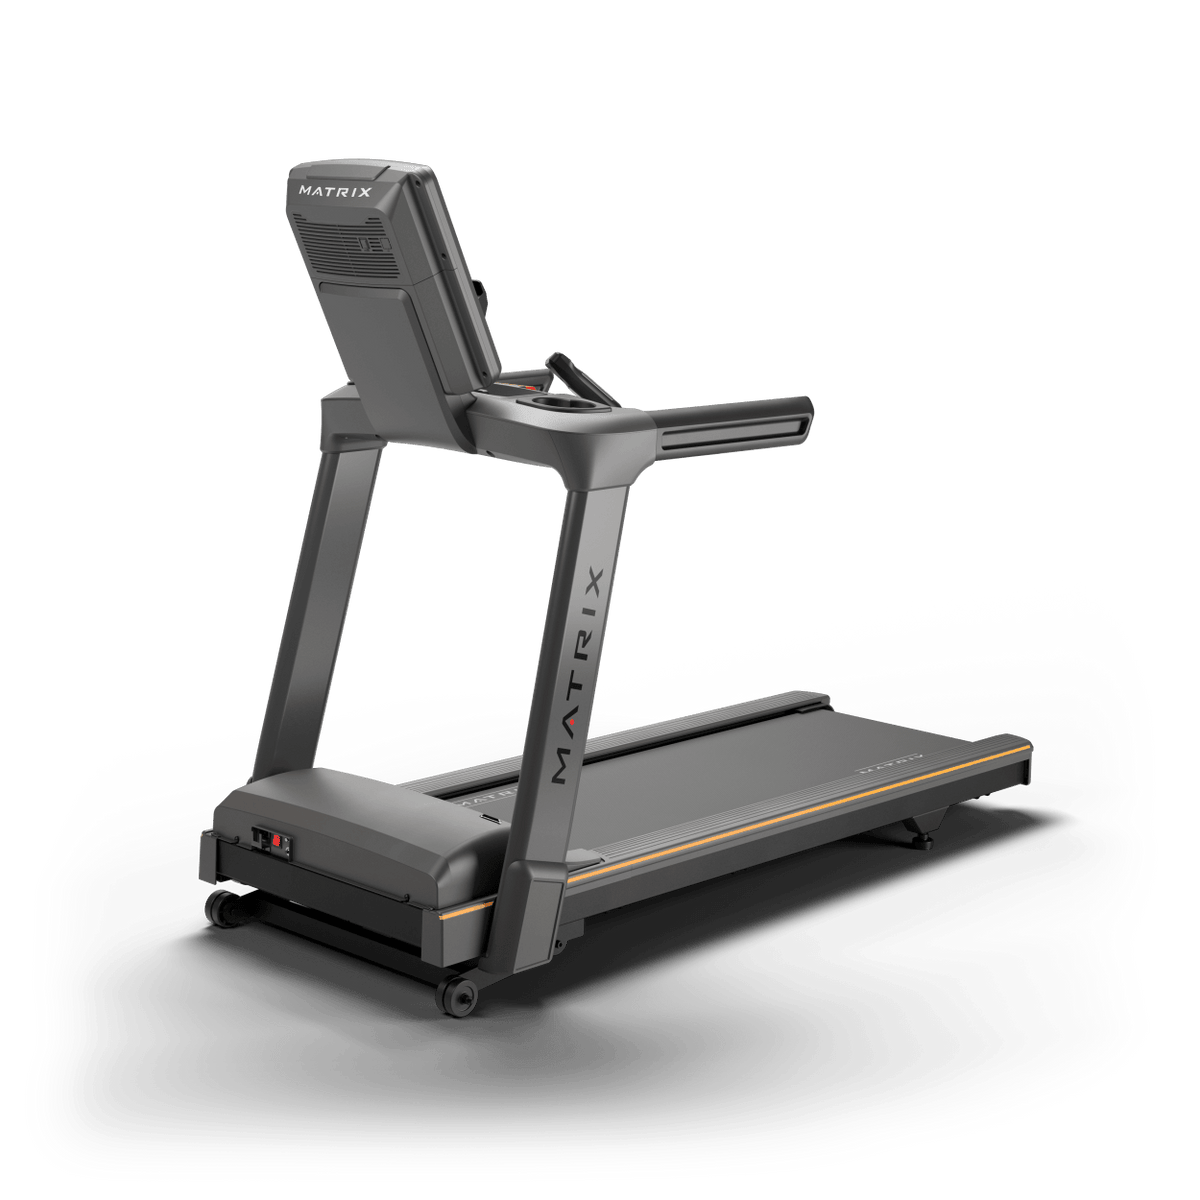 Matrix Fitness Lifestyle Treadmill with Premium LED Console rear view | Fitness Experience